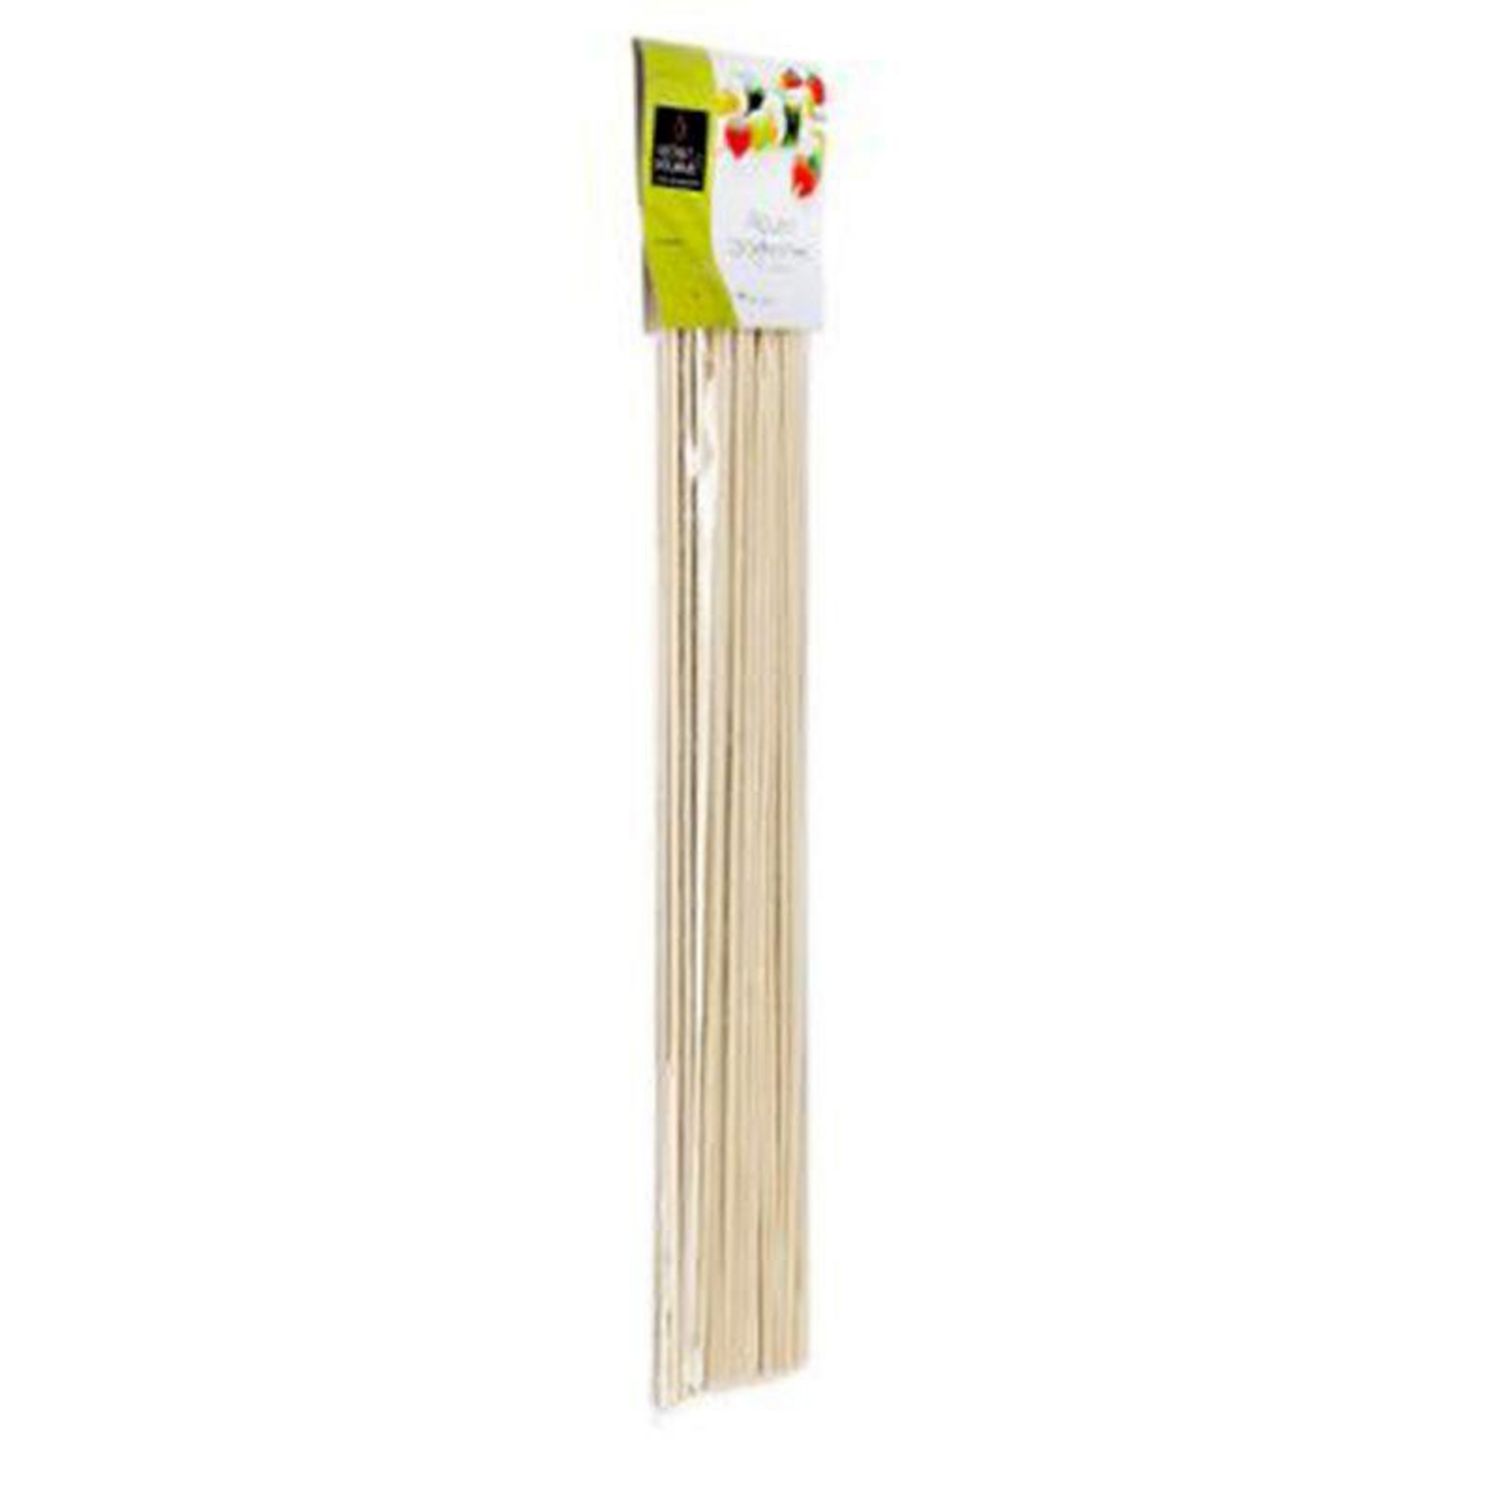 Relaxdays Piques bois, lot de 500 brochettes barbecue, bambou